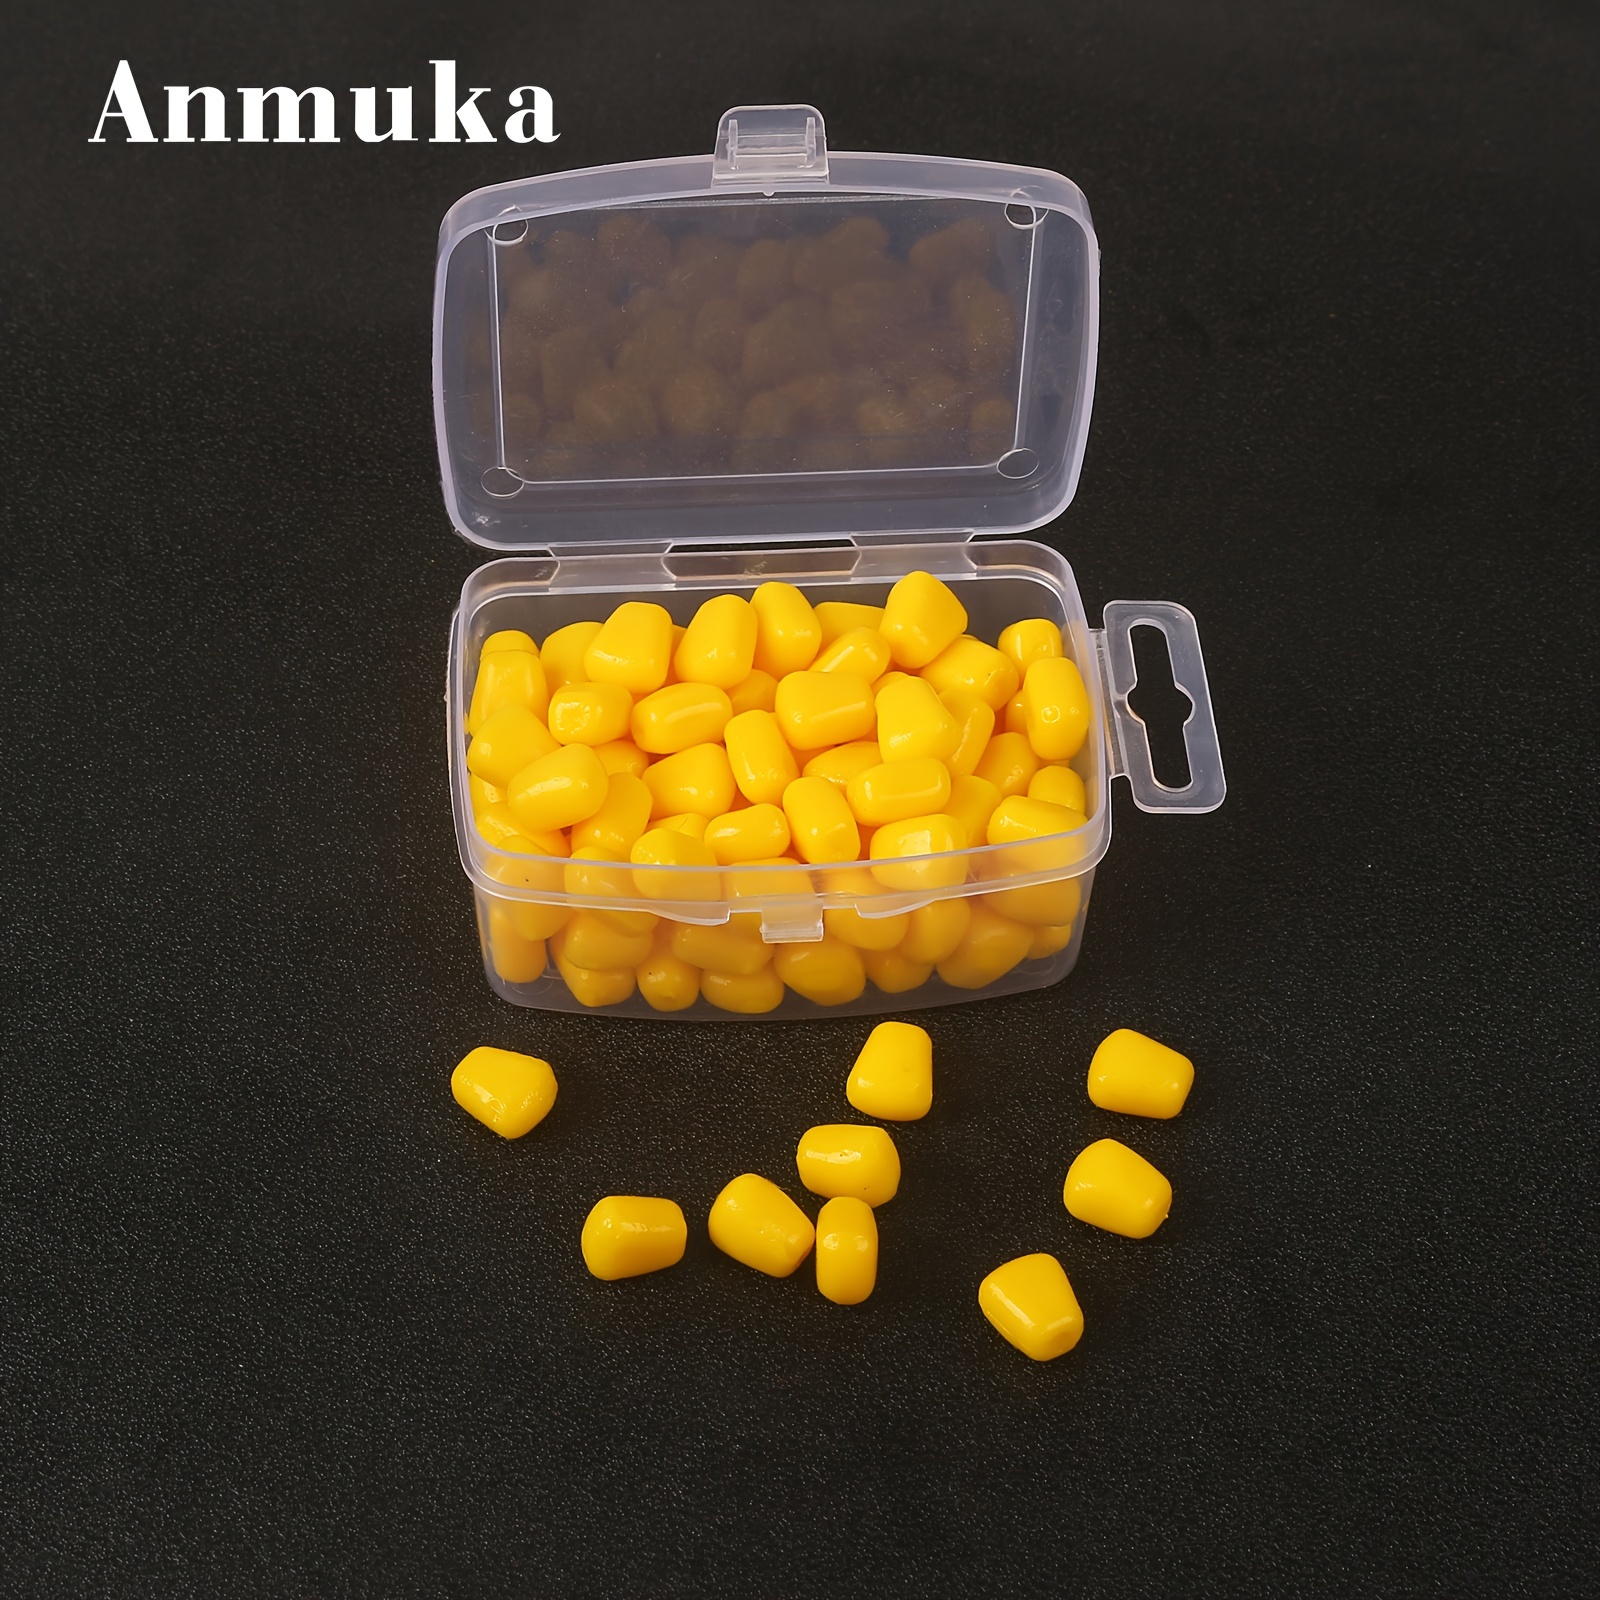 

100pcs Floating Corn Kernels, Silicone Soft Baits For Carp Catfish, Outdoor Fishing Accessories